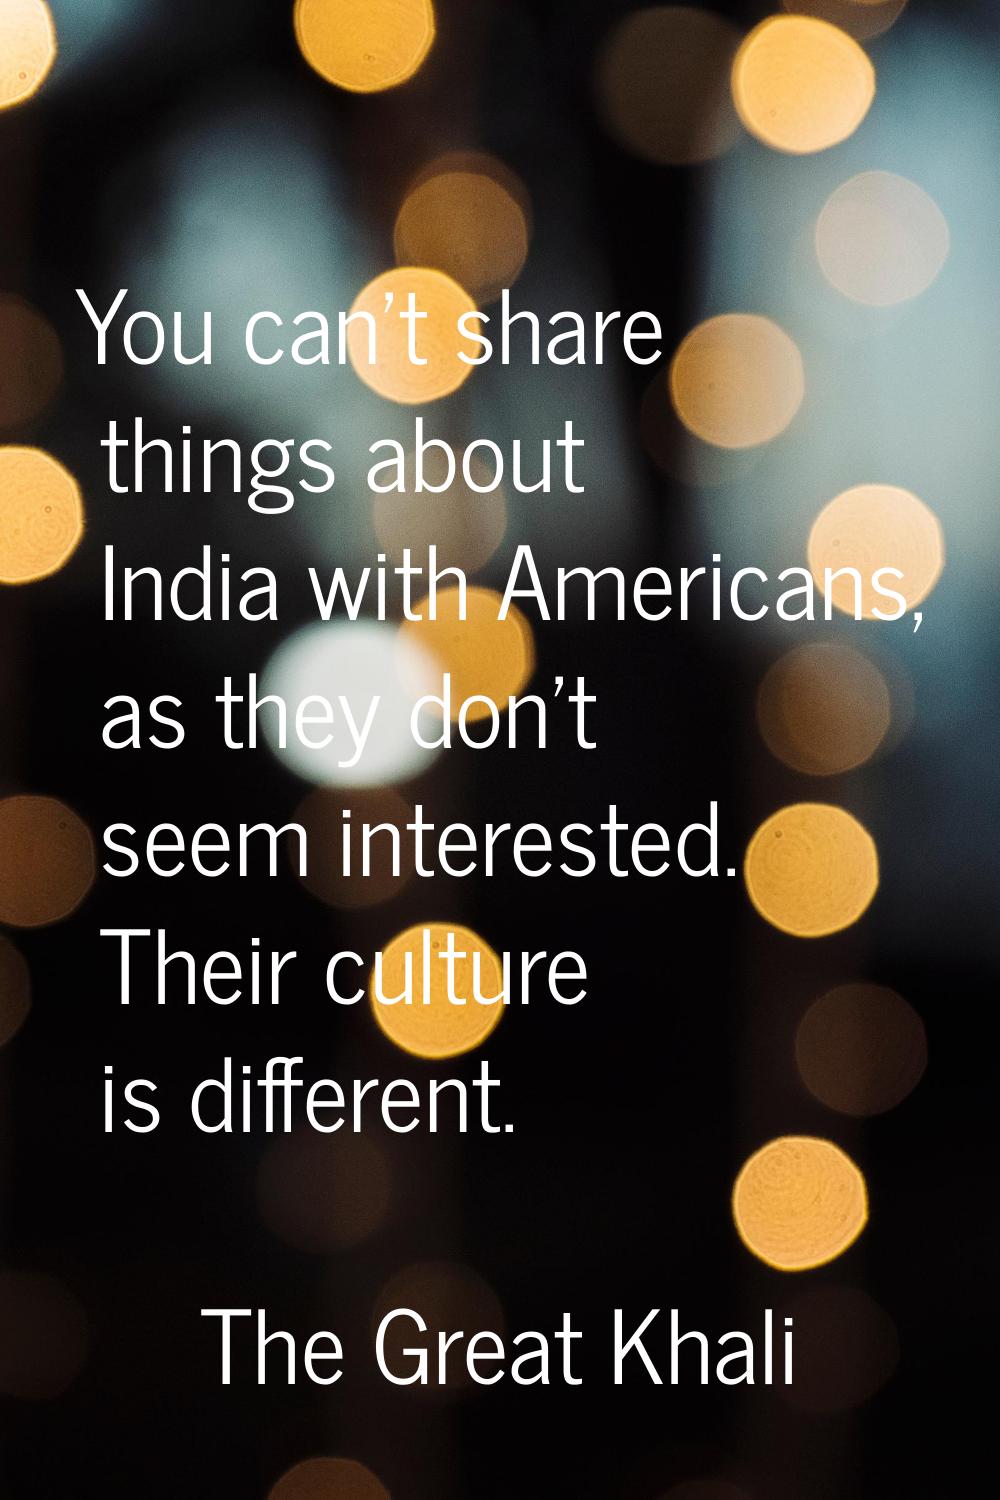 You can't share things about India with Americans, as they don't seem interested. Their culture is 